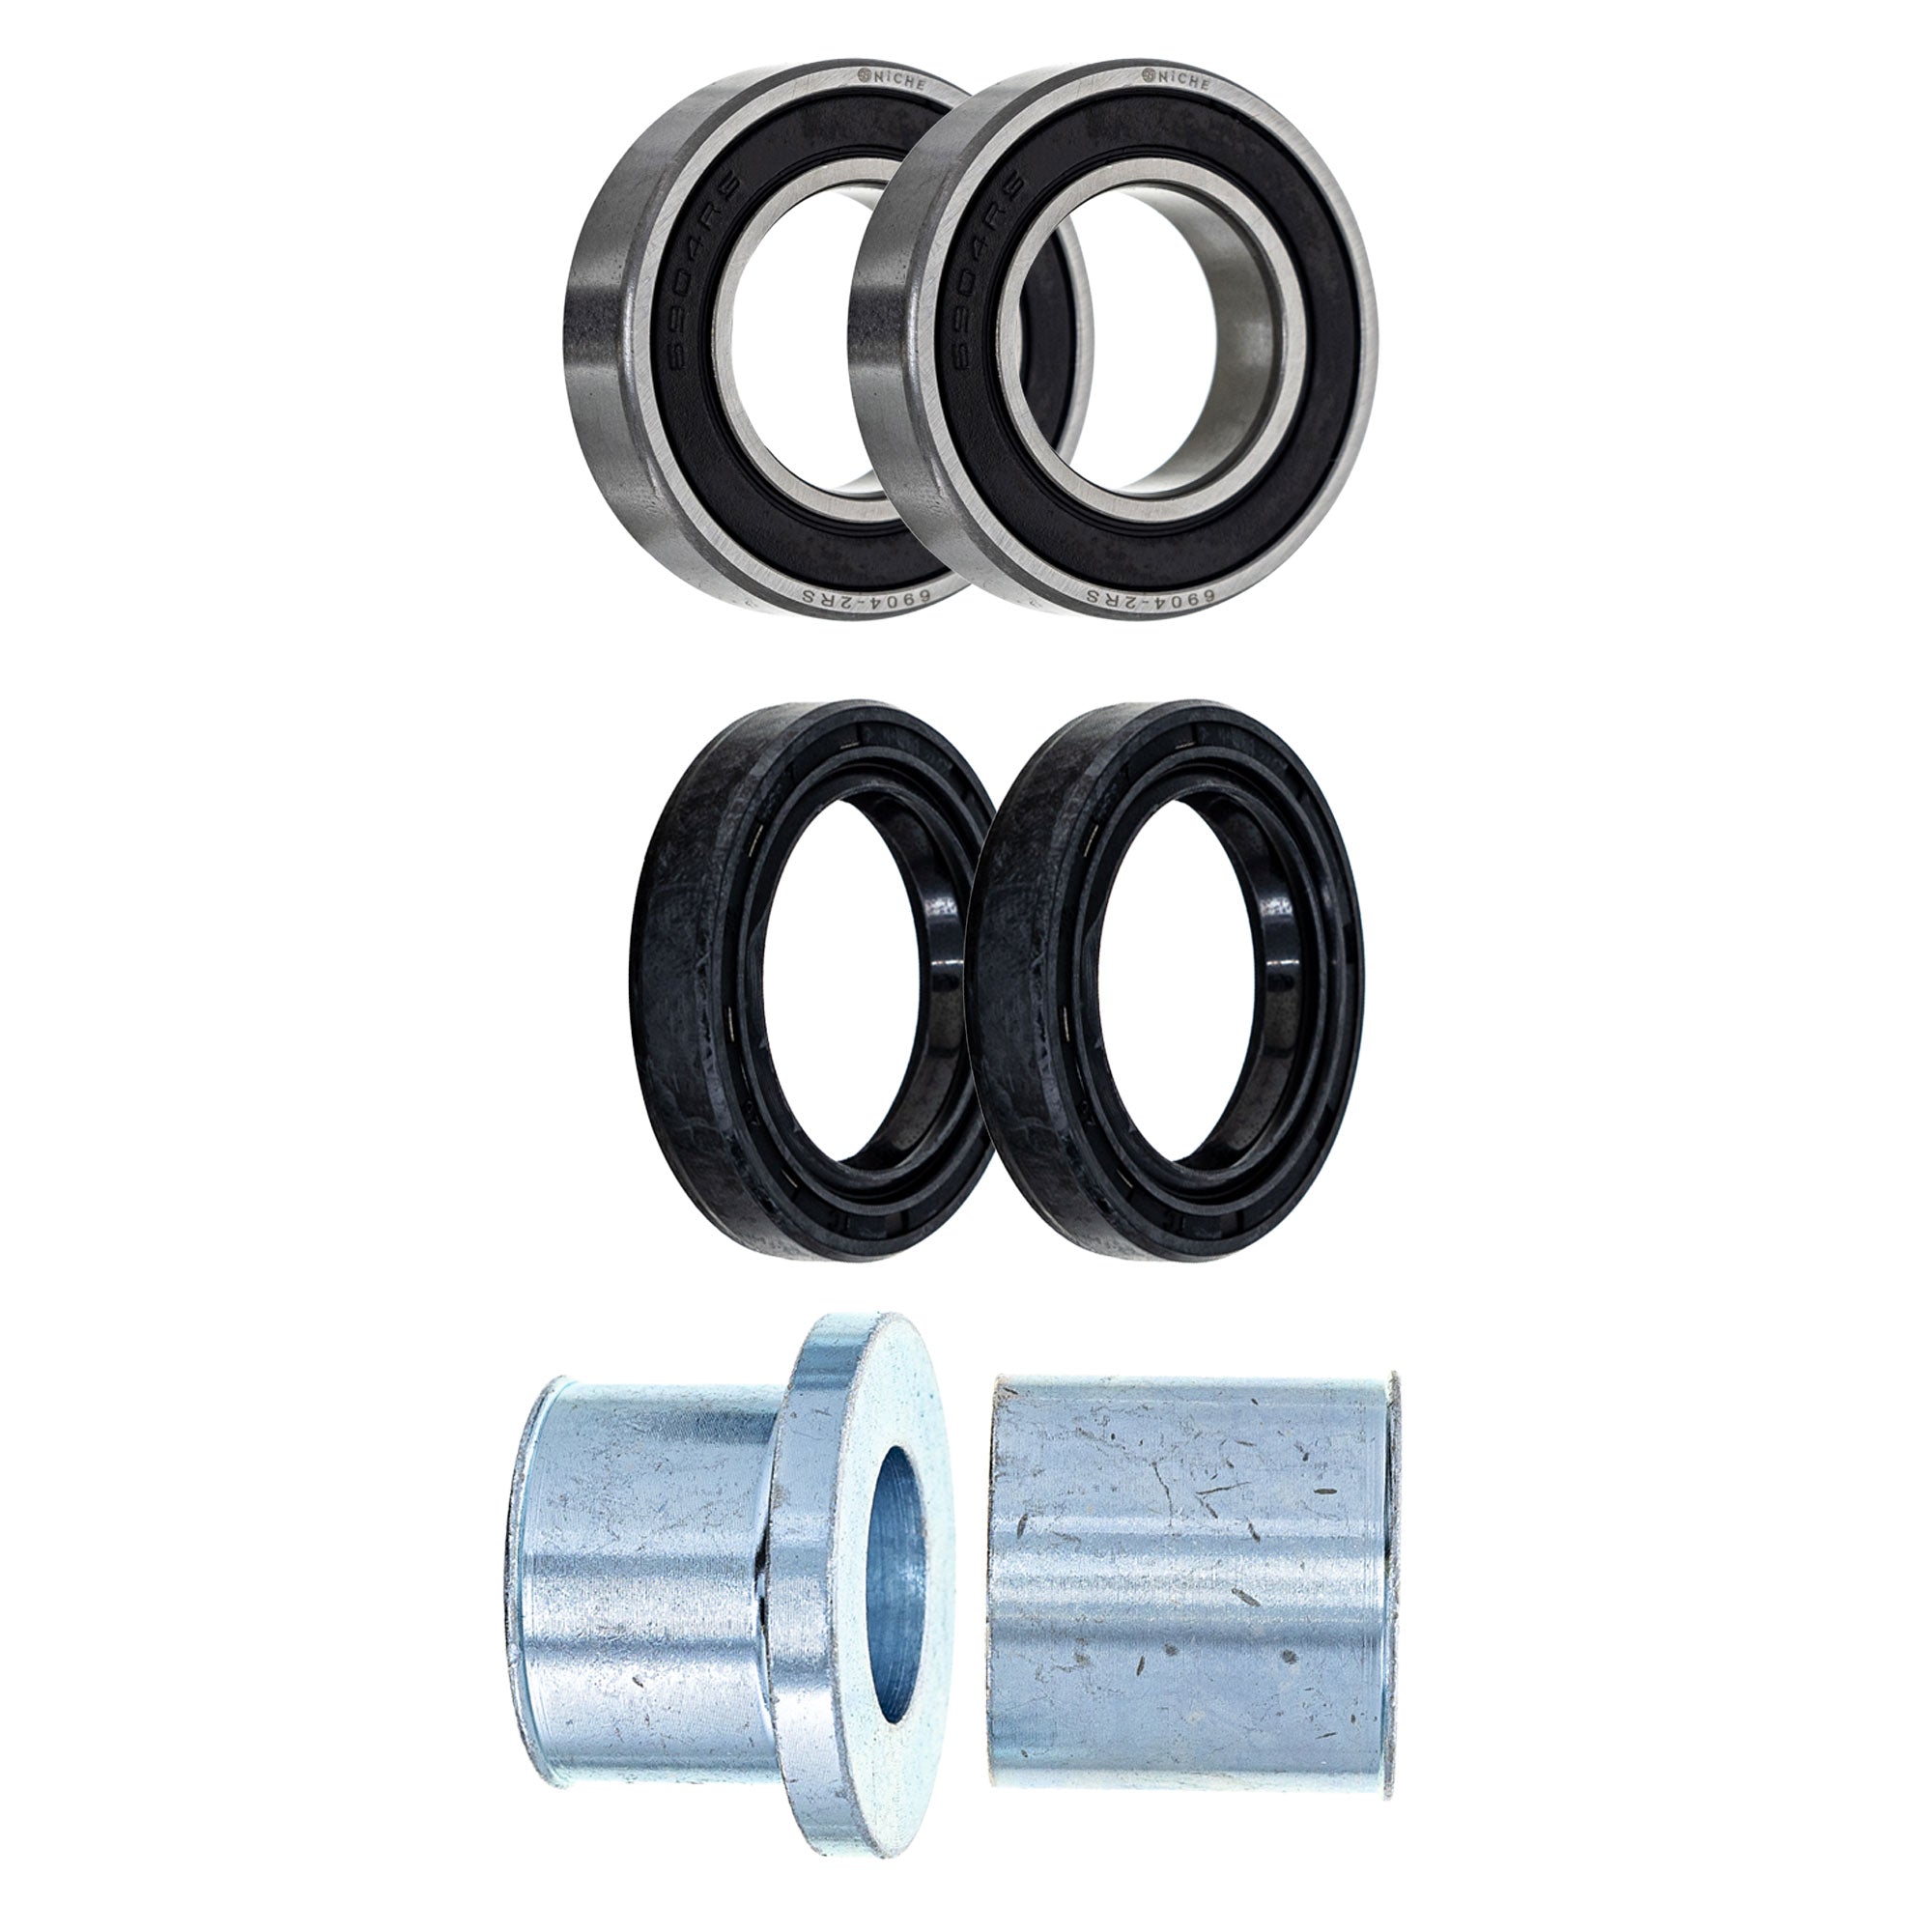 Wheel Bearing Spacer Seal Kit for zOTHER YZ450F YZ426F YZ250F YZ250 NICHE MK1009218